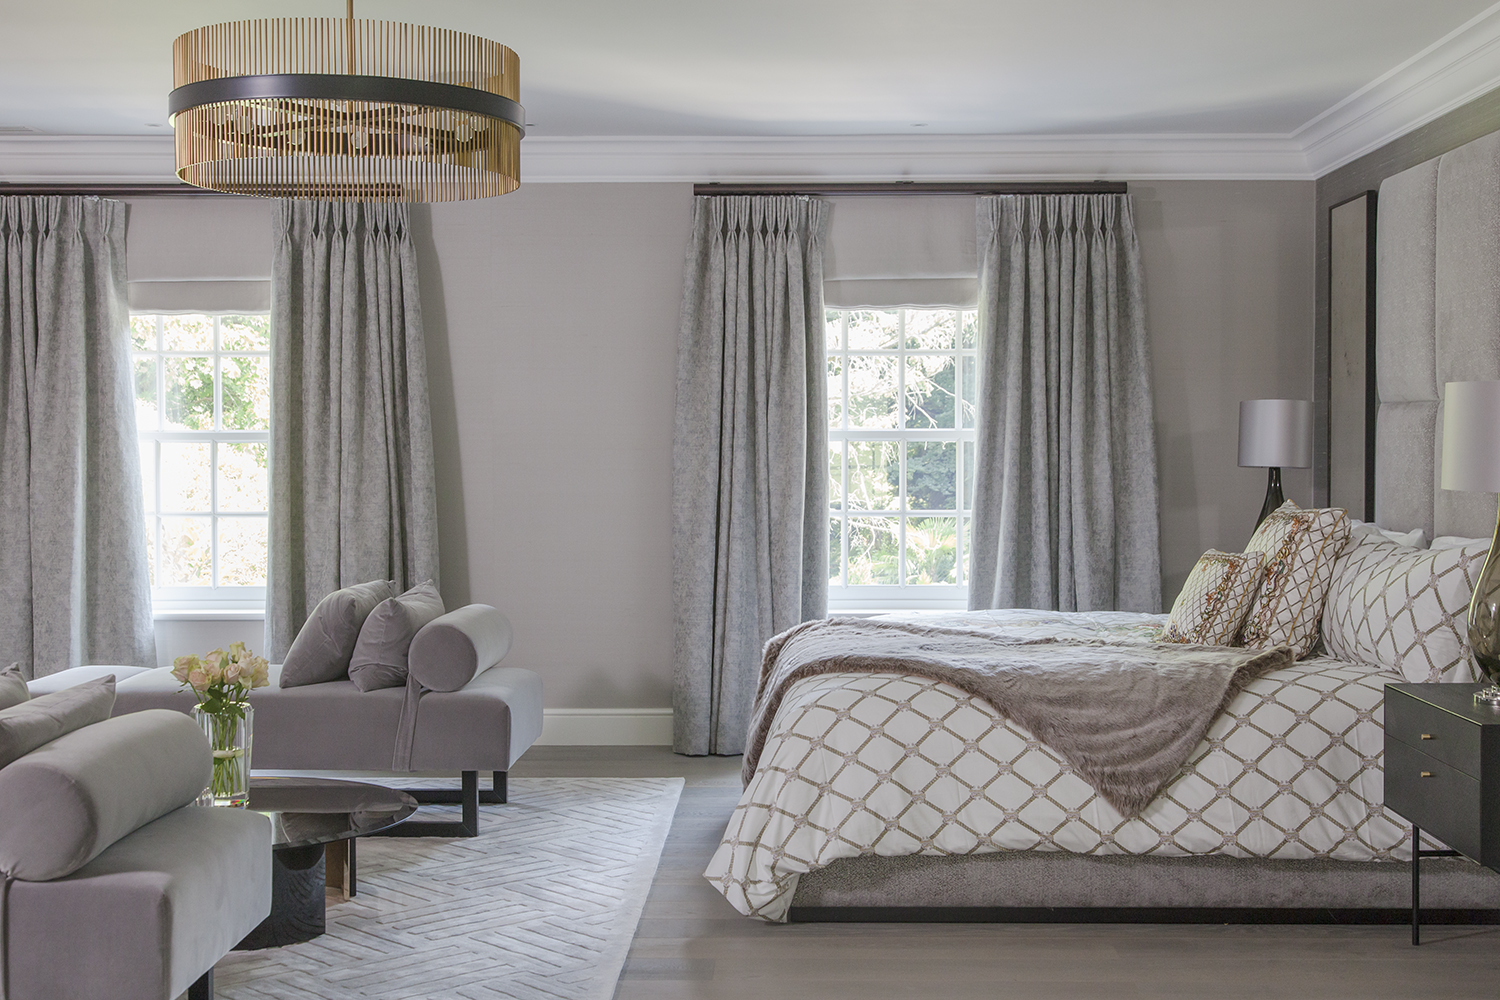 MASTER BEDROOM_ASPEN HOUSE_Loomah Bespoke Carpets & Rugs_Interior Design By Callender Howorth_Photography By Megan Taylor